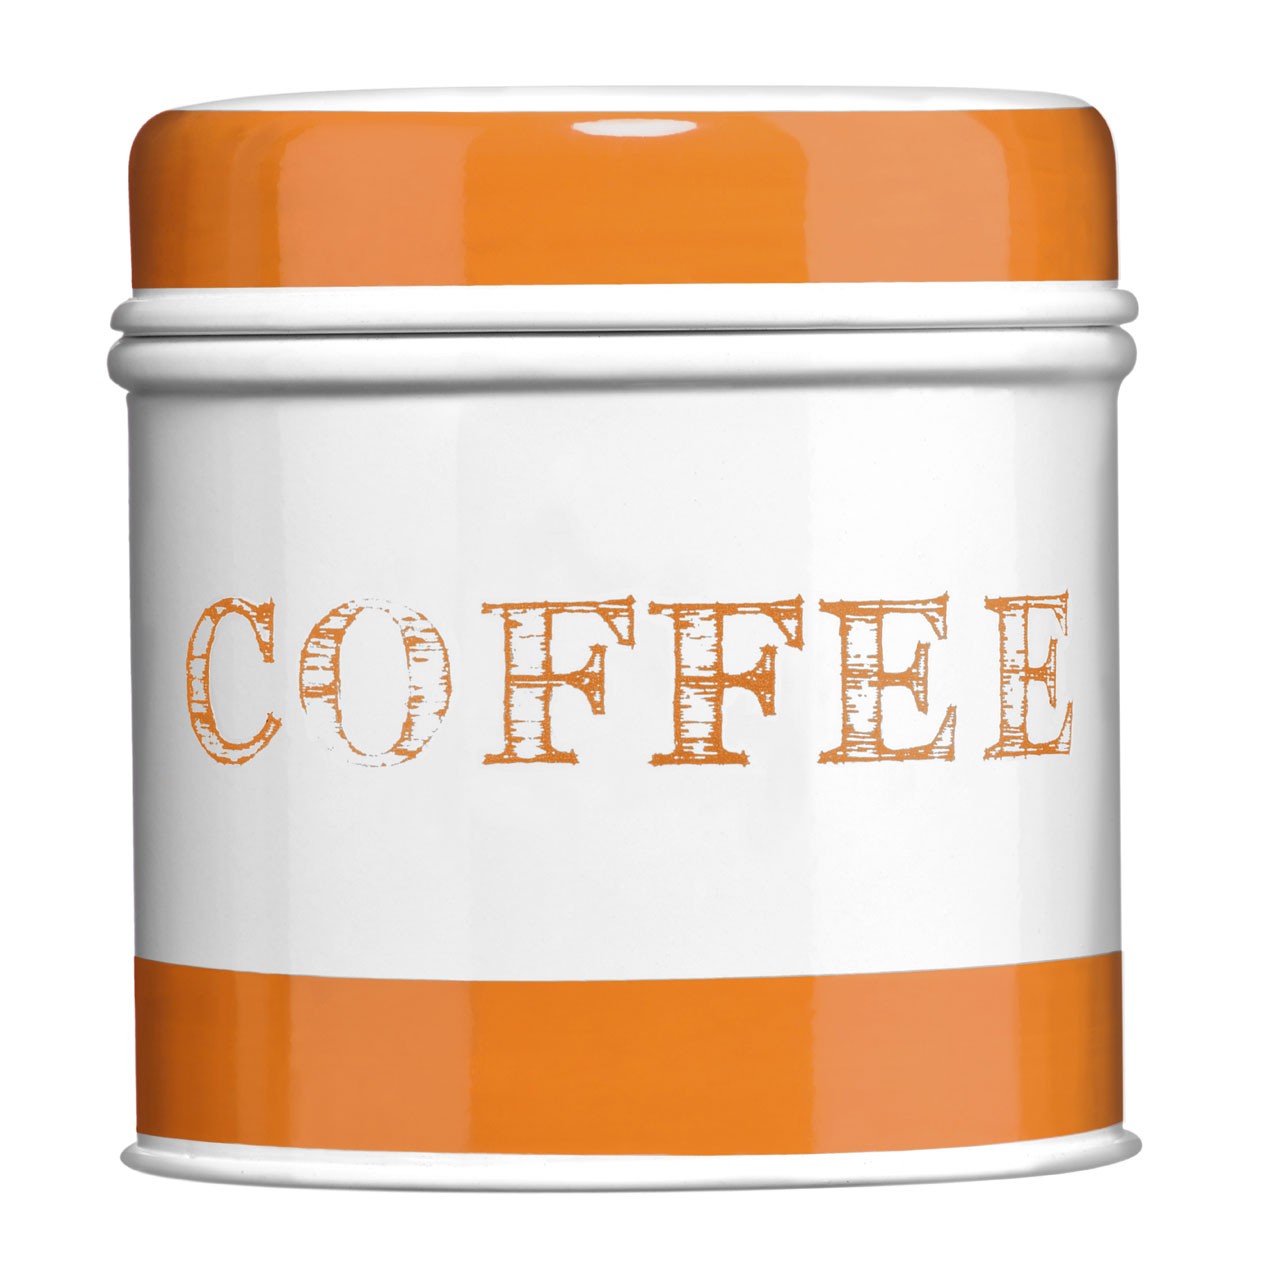 Band Coffee Canister - Orange